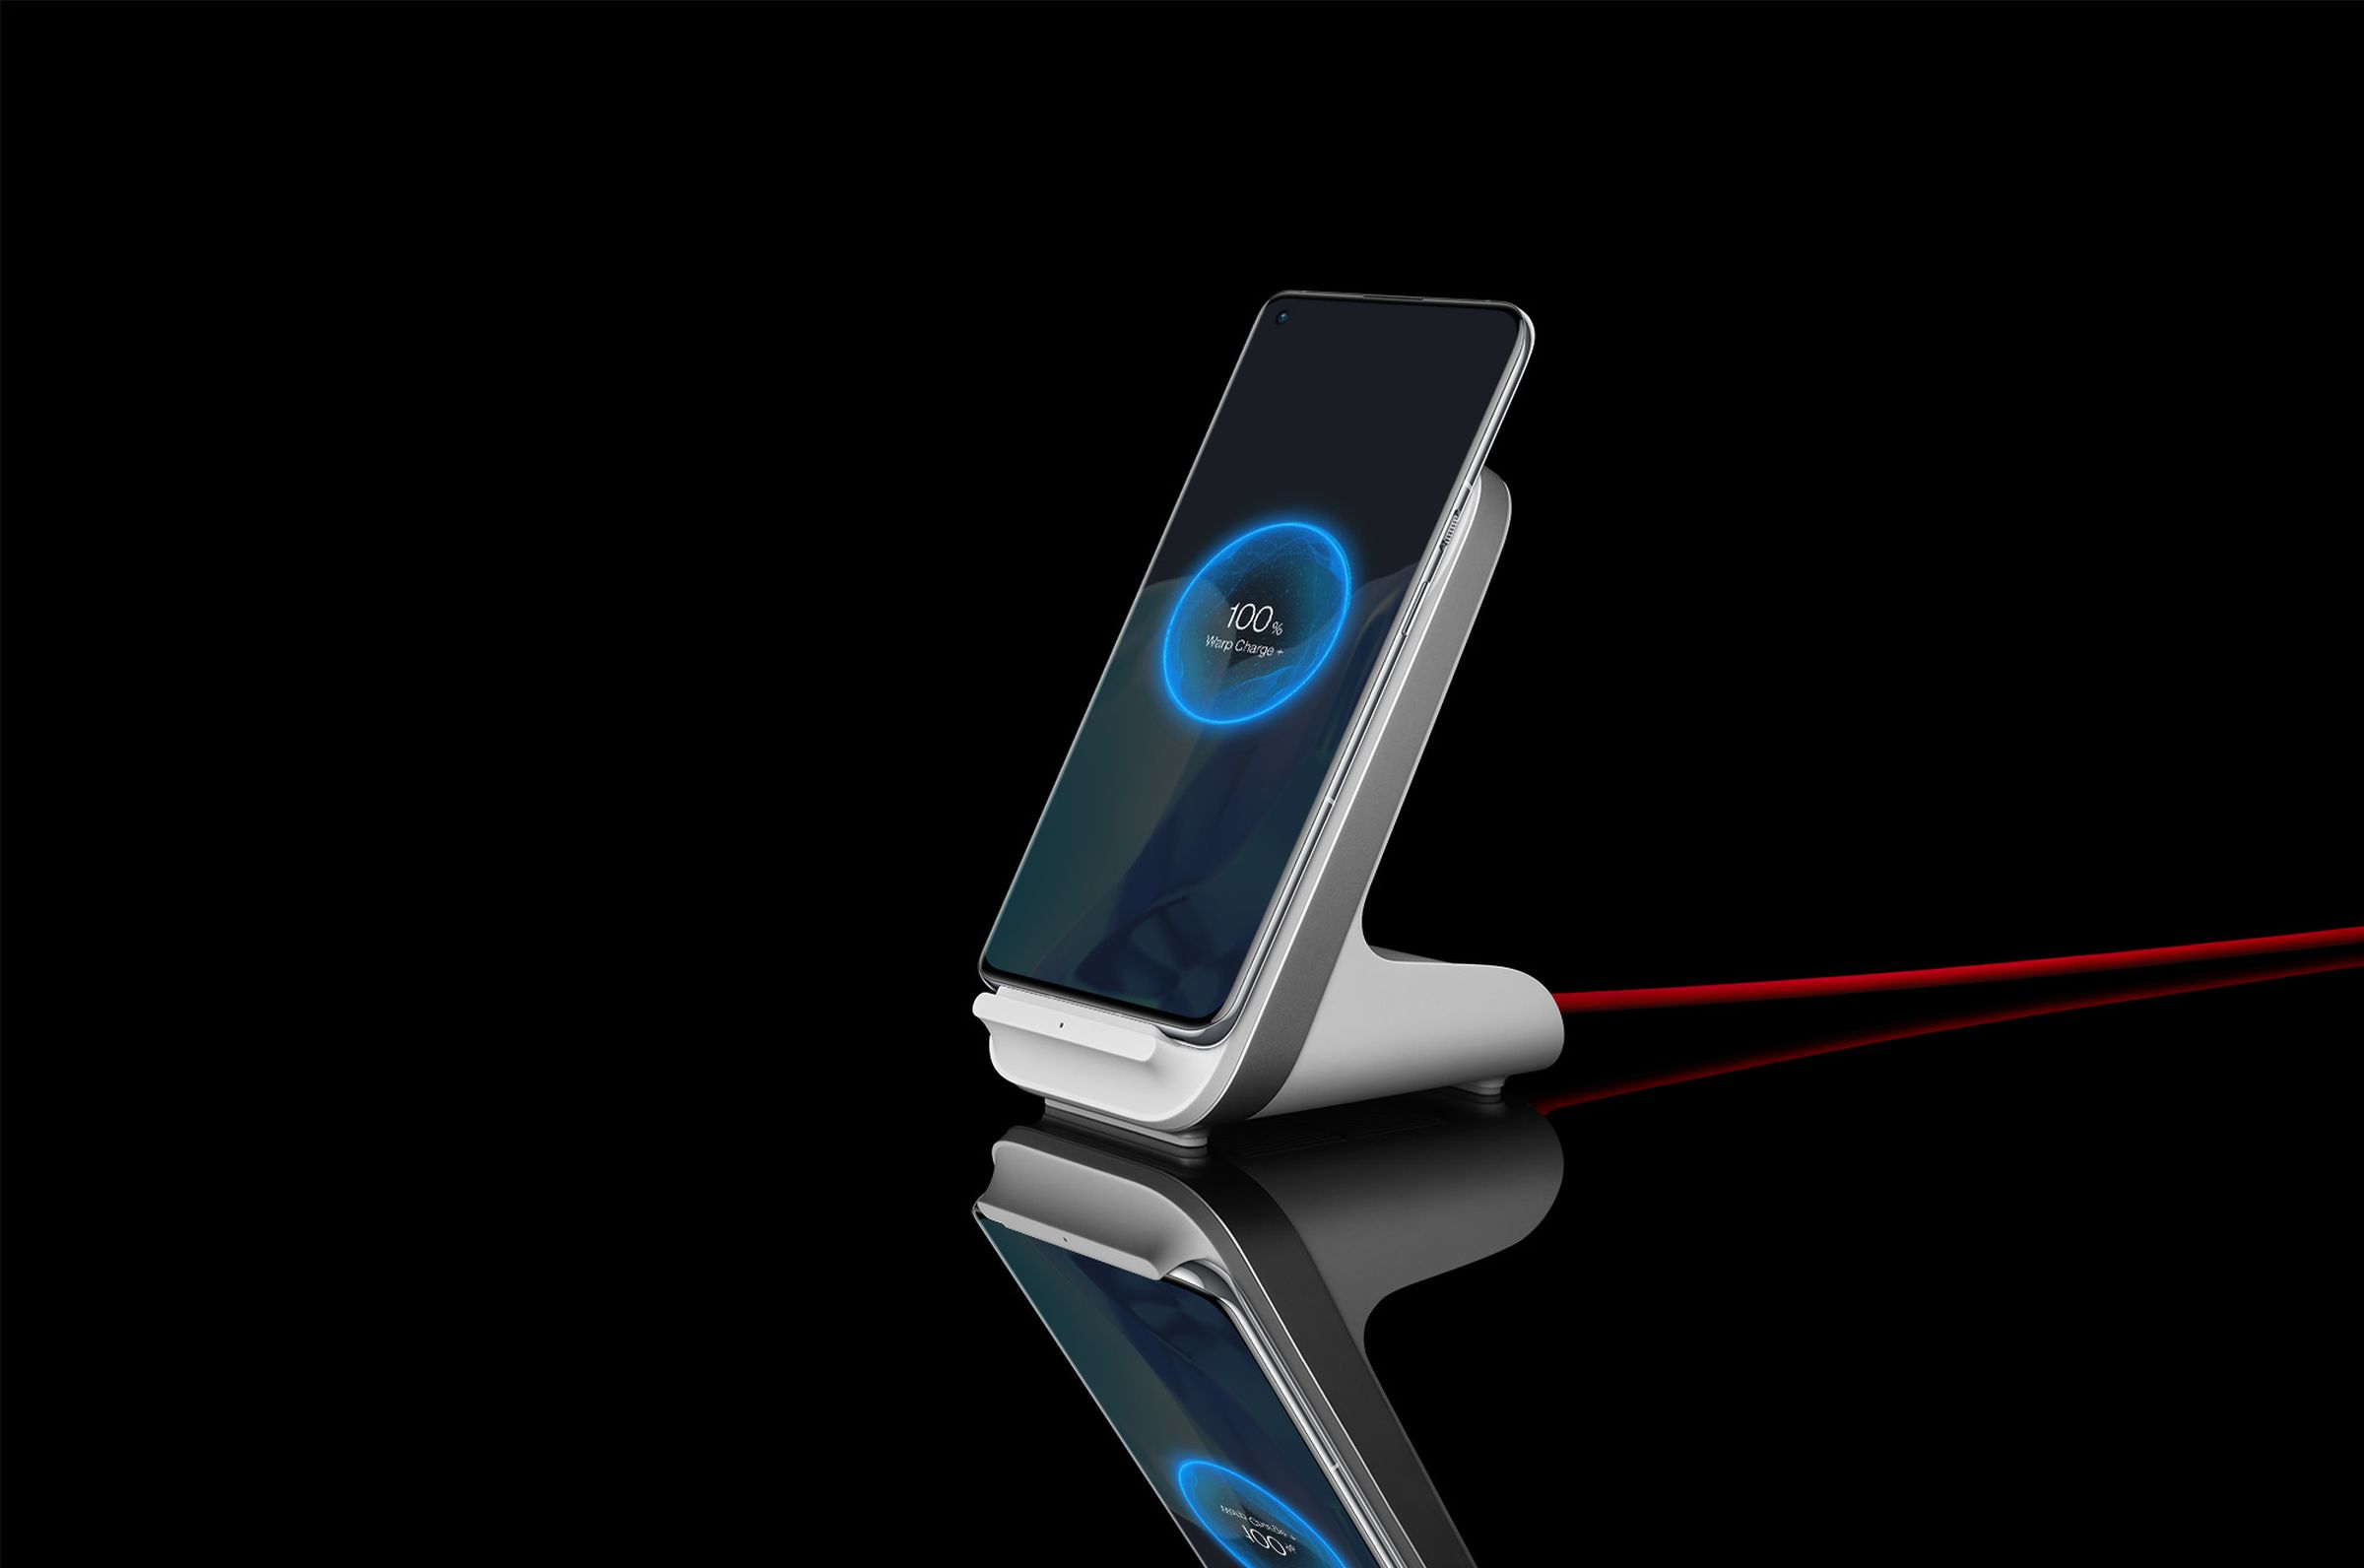 The new Warp Charge 50 wireless charger now features a detachable cable based on user feedback.